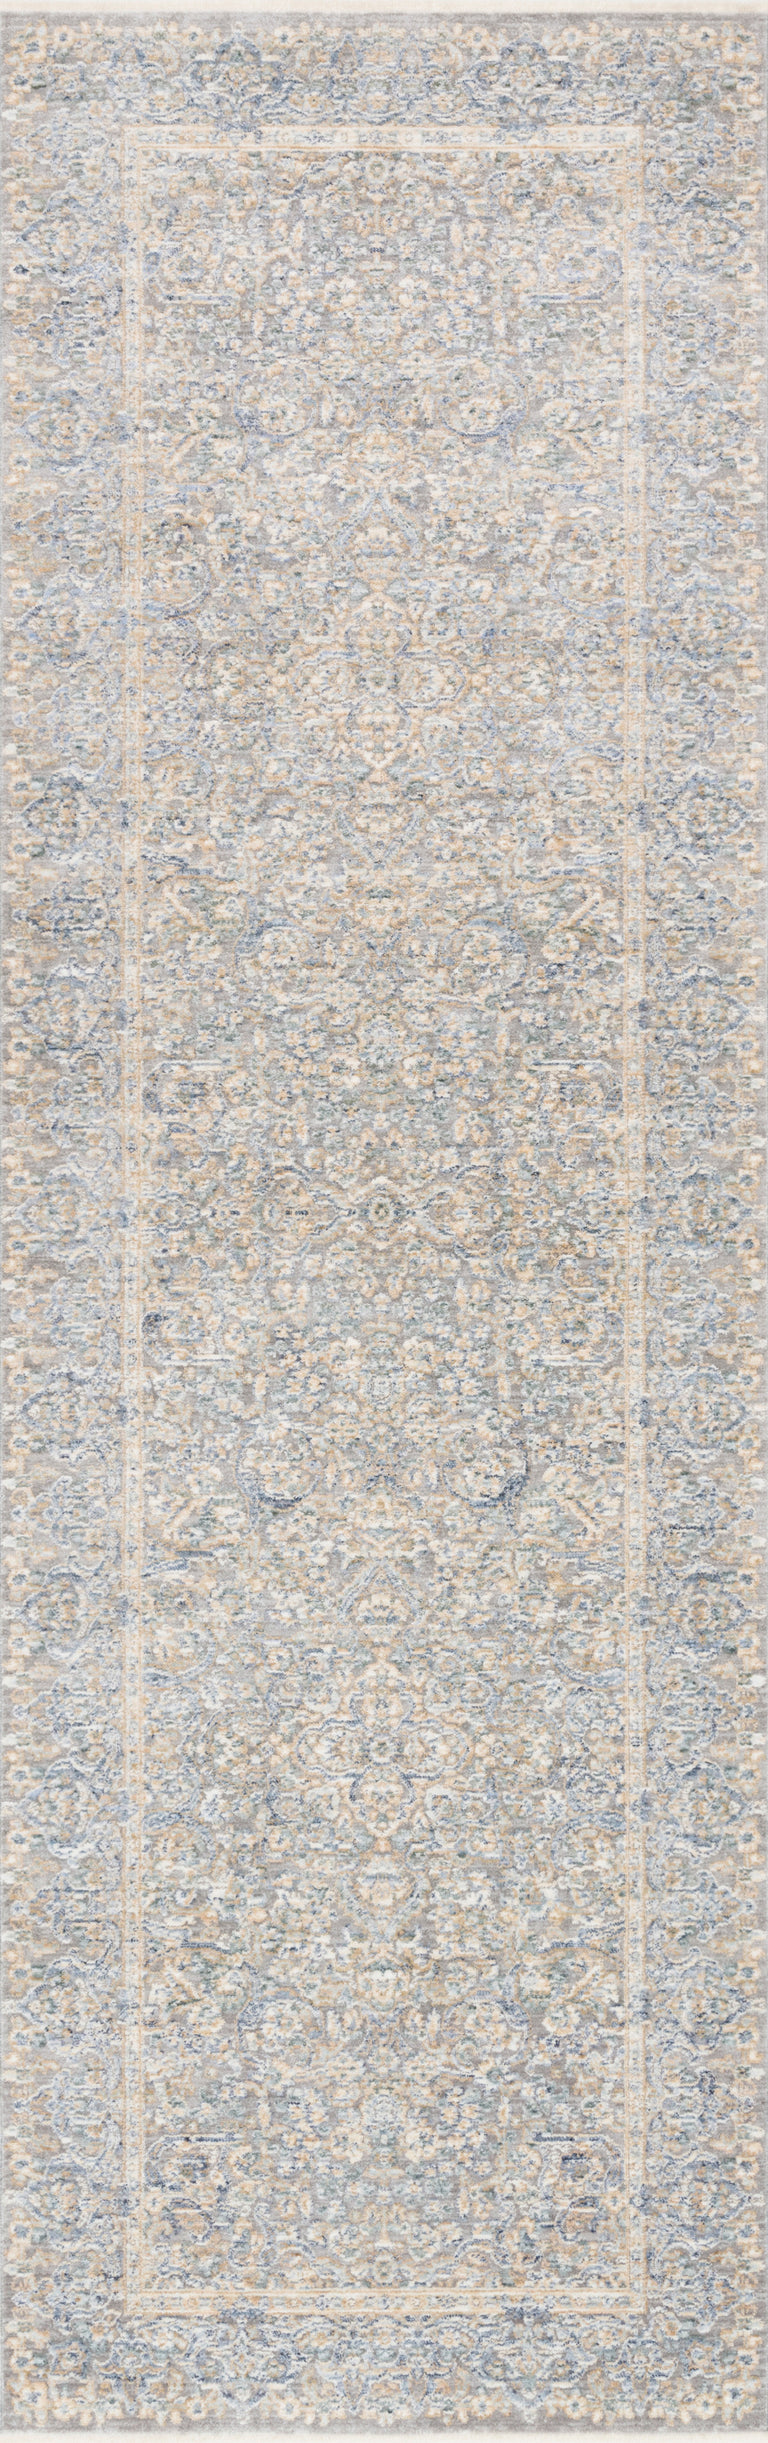 Loloi Rugs Pandora Collection Rug in Stone, Gold - 9'6" x 12'5"